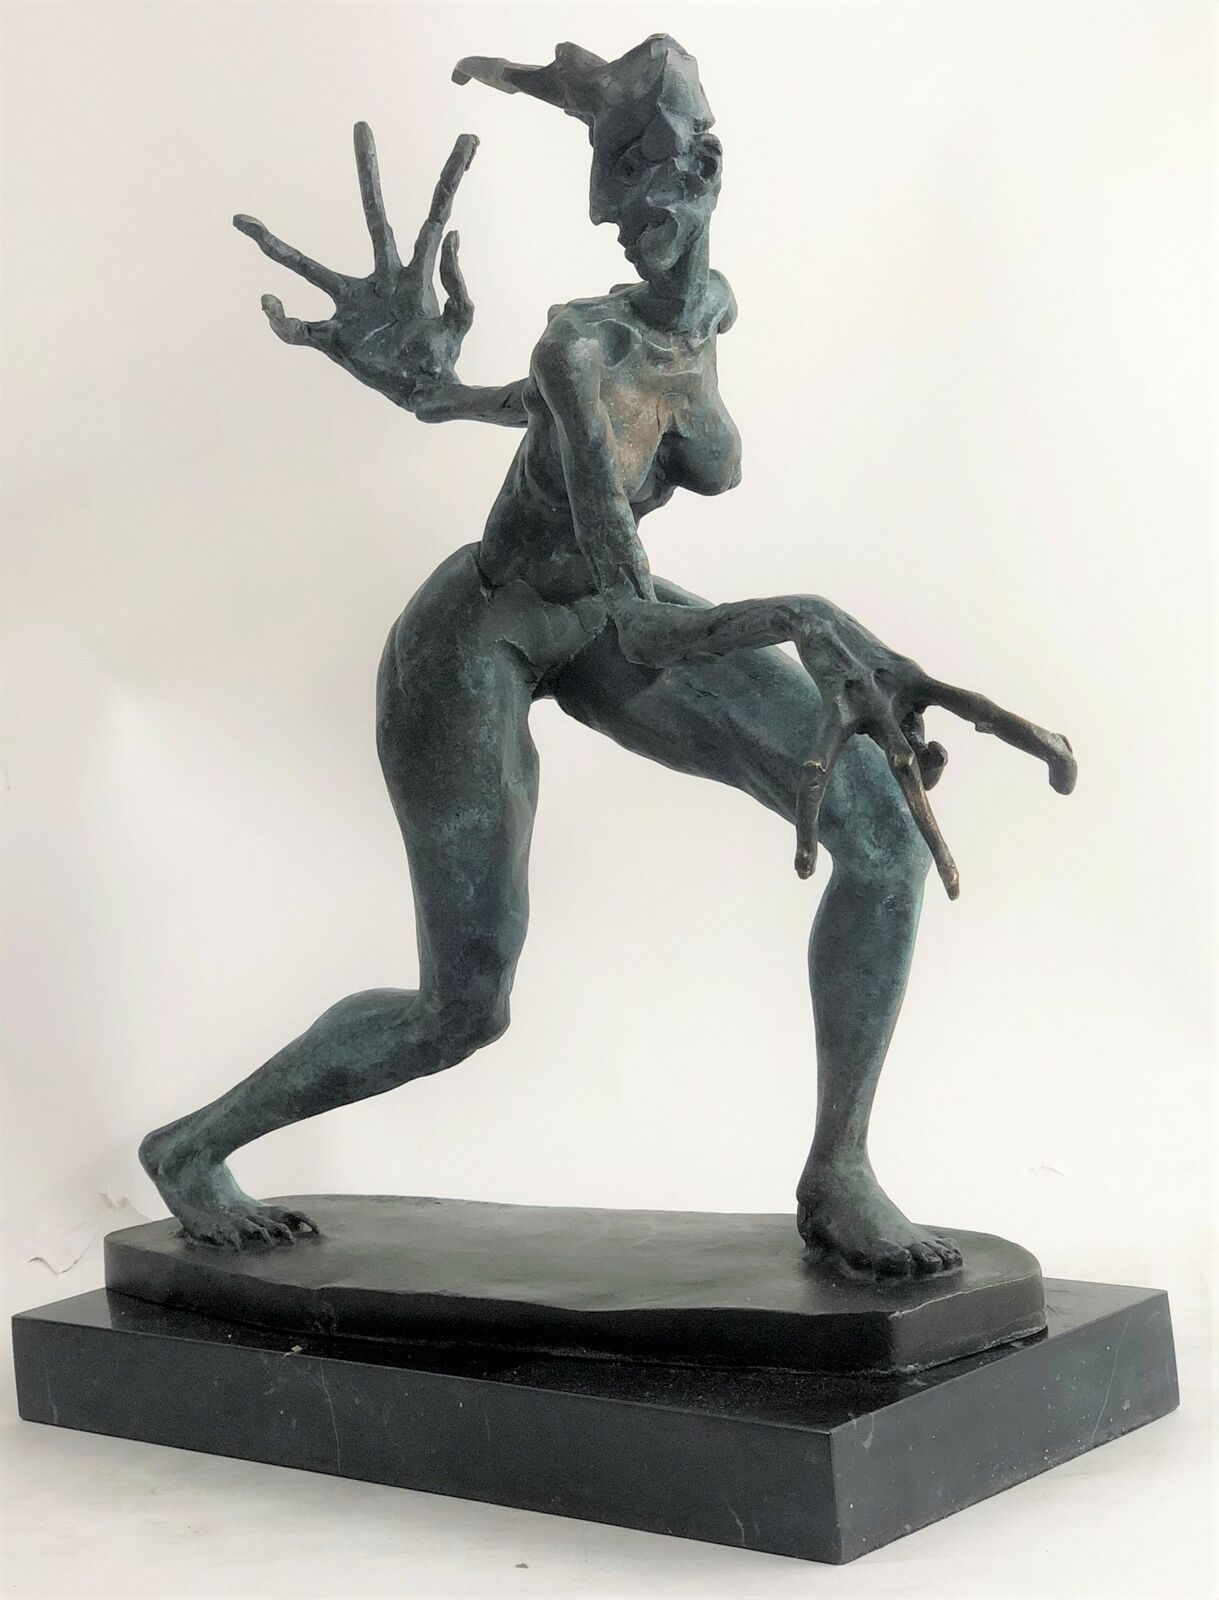 Handmade Nude Unique Woman Monster Limited Numbered Bronze Sculpture Figurine 